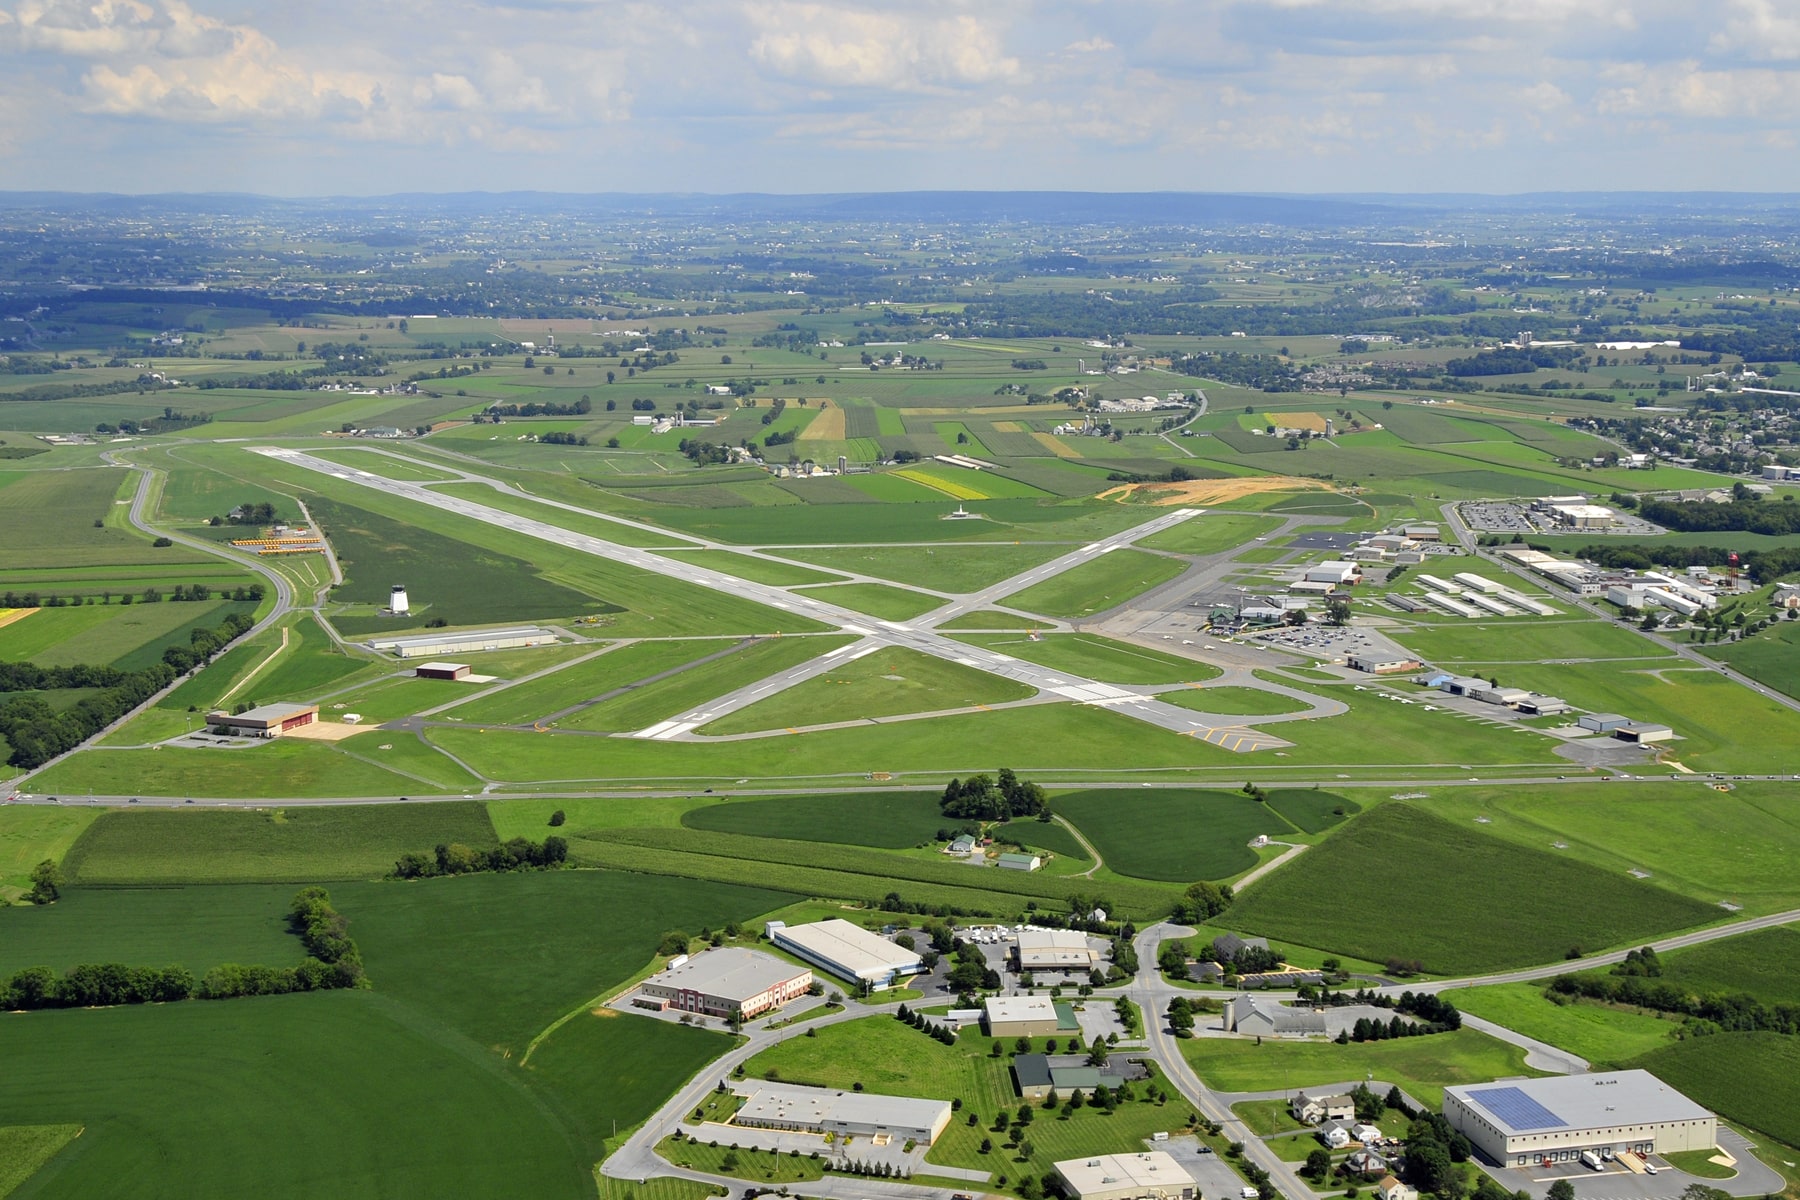 An aerial image of an airport runway with green fields, houses, and larger buildings visible in the surrounding area